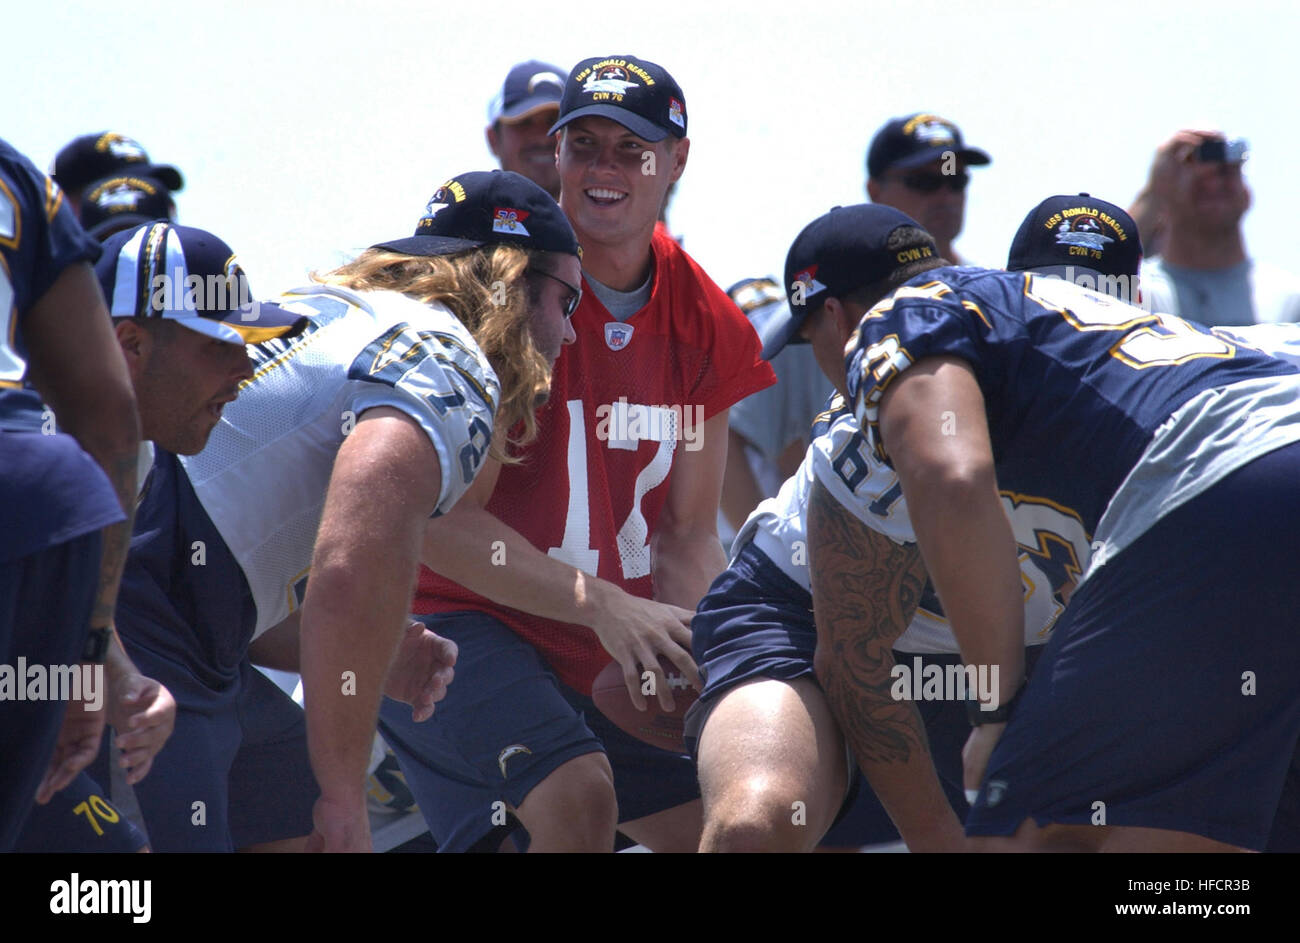 060811-N-4776G-095   San Diego, Calif. (Aug. 11, 2006) – Starting Quarterback for the National Football League (NFL) San Diego Chargers, Philip Rivers (17), takes the snap from Center, Nick Hardwick (61), during a light practice on the flight deck aboard USS Ronald Reagan (CVN 76). The Chargers held practice aboard the Navy's newest nuclear powered aircraft carrier in preparation for their first pre-season game against the Green Bay Packers, August 12. During pre-game ceremonies, a military appreciation game will involve Ronald Reagan Sailors and the unfurling of a giant American display flag. Stock Photo